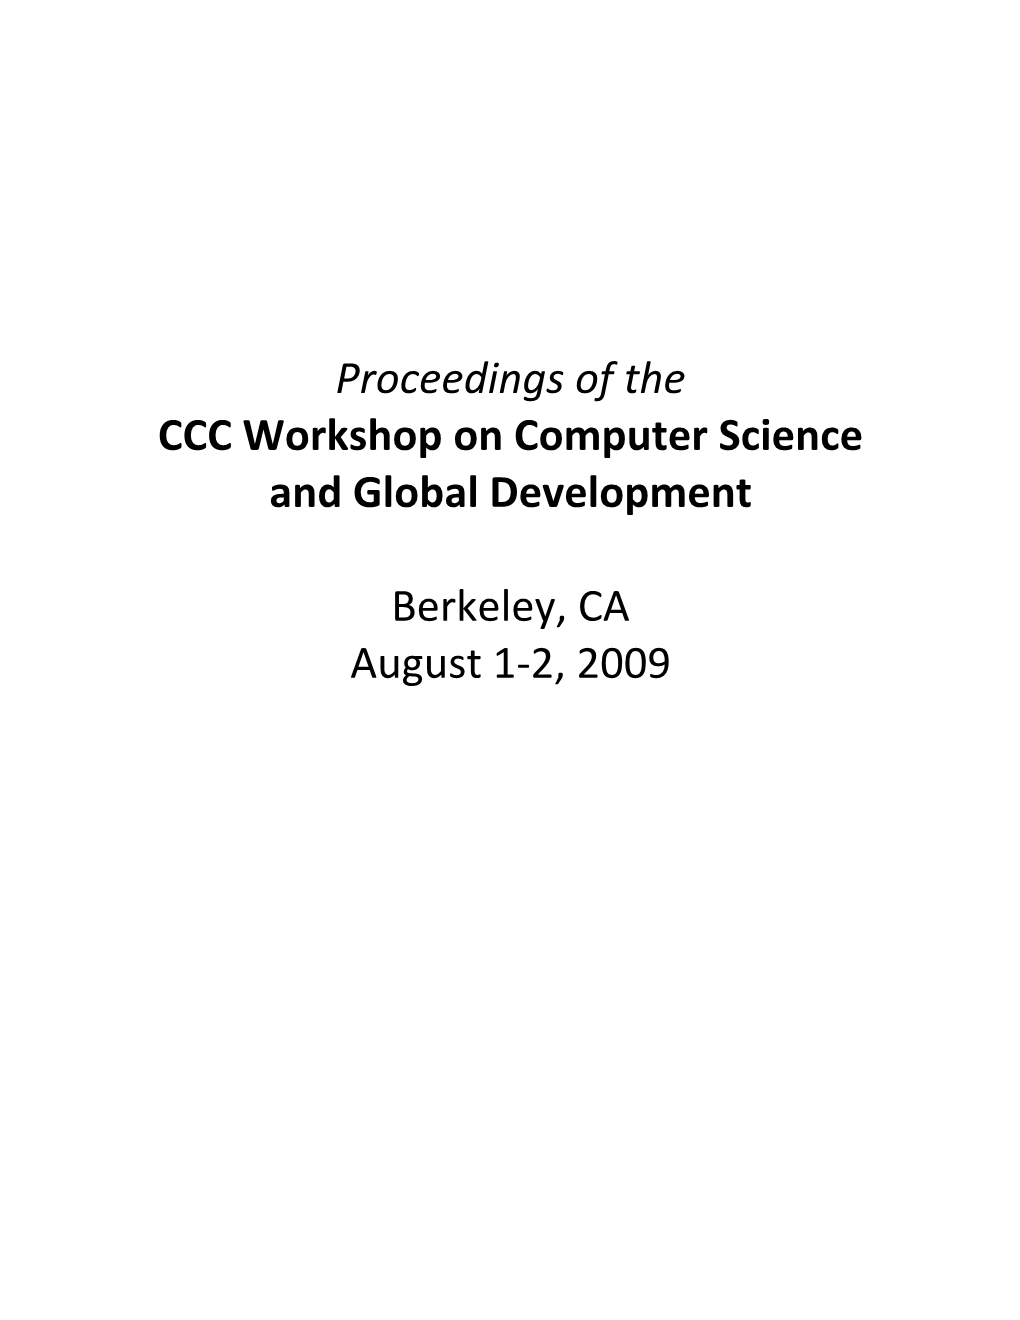 Proceedings of the CCC Workshop on Computer Science and Global Development